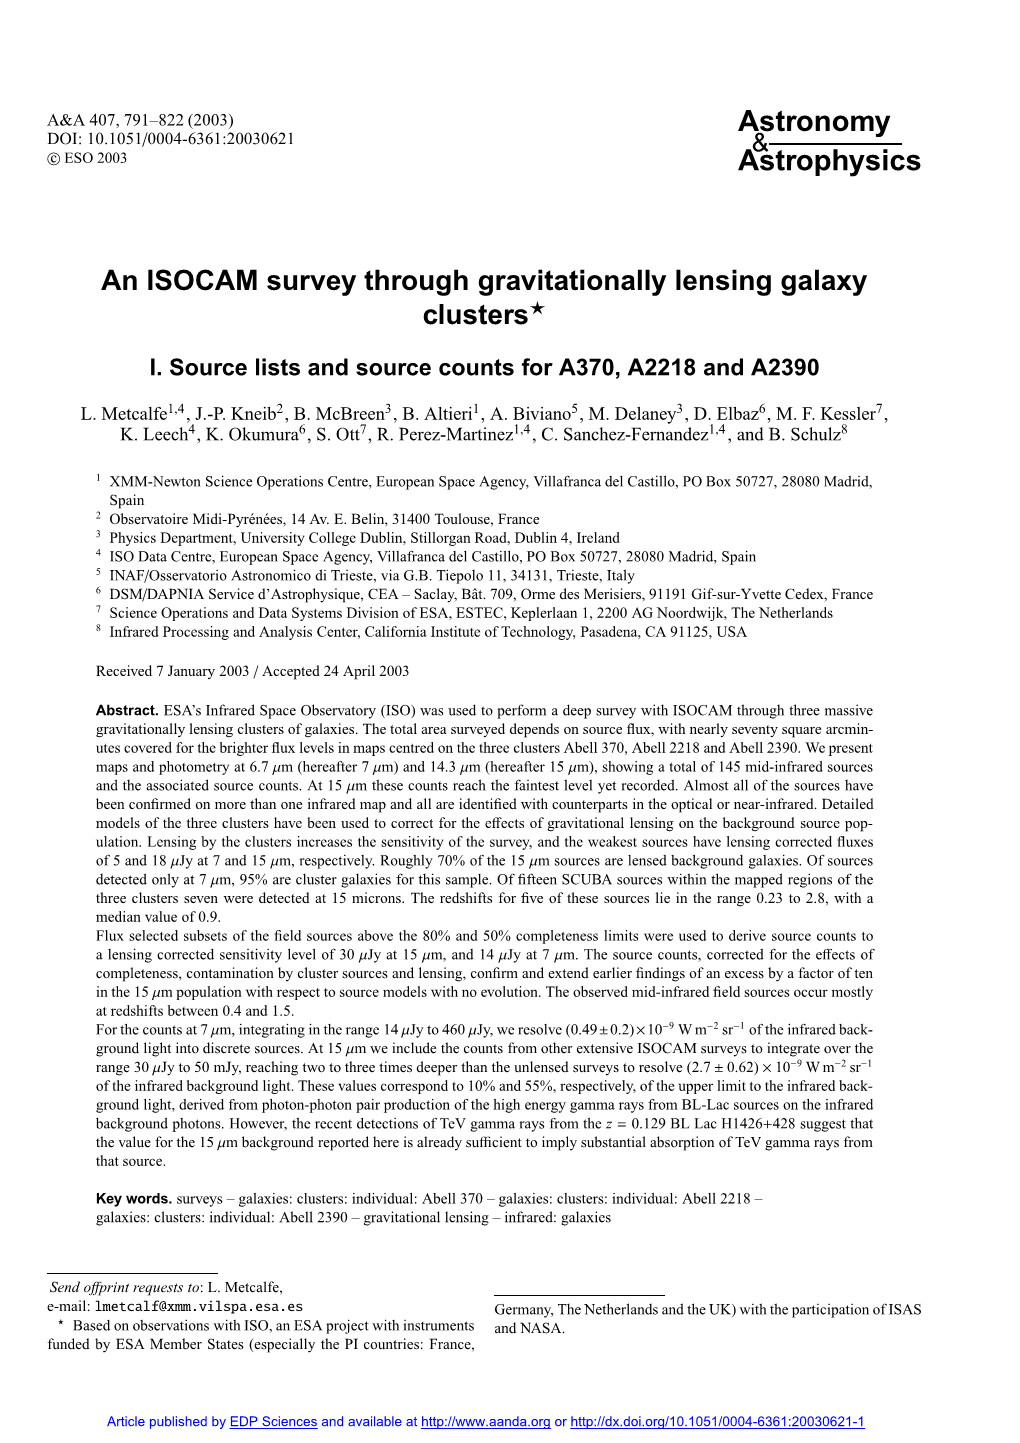 An ISOCAM Survey Through Gravitationally Lensing Galaxy Clusters?